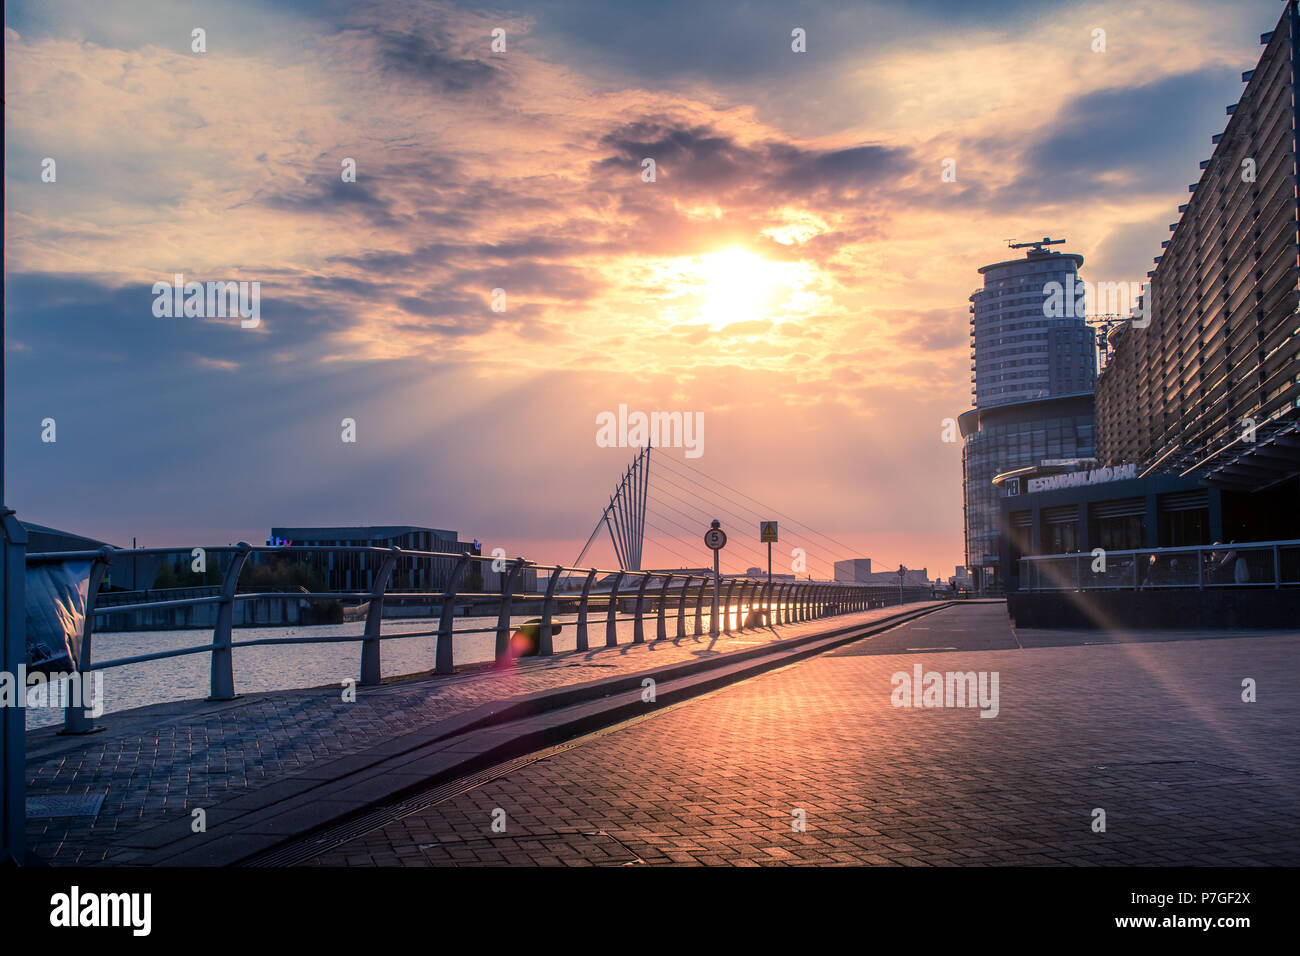 A beautiful celestial sunset over Salford Quays, sun rays shine, the light reflects off the floor to form a pleasing image. Stock Photo